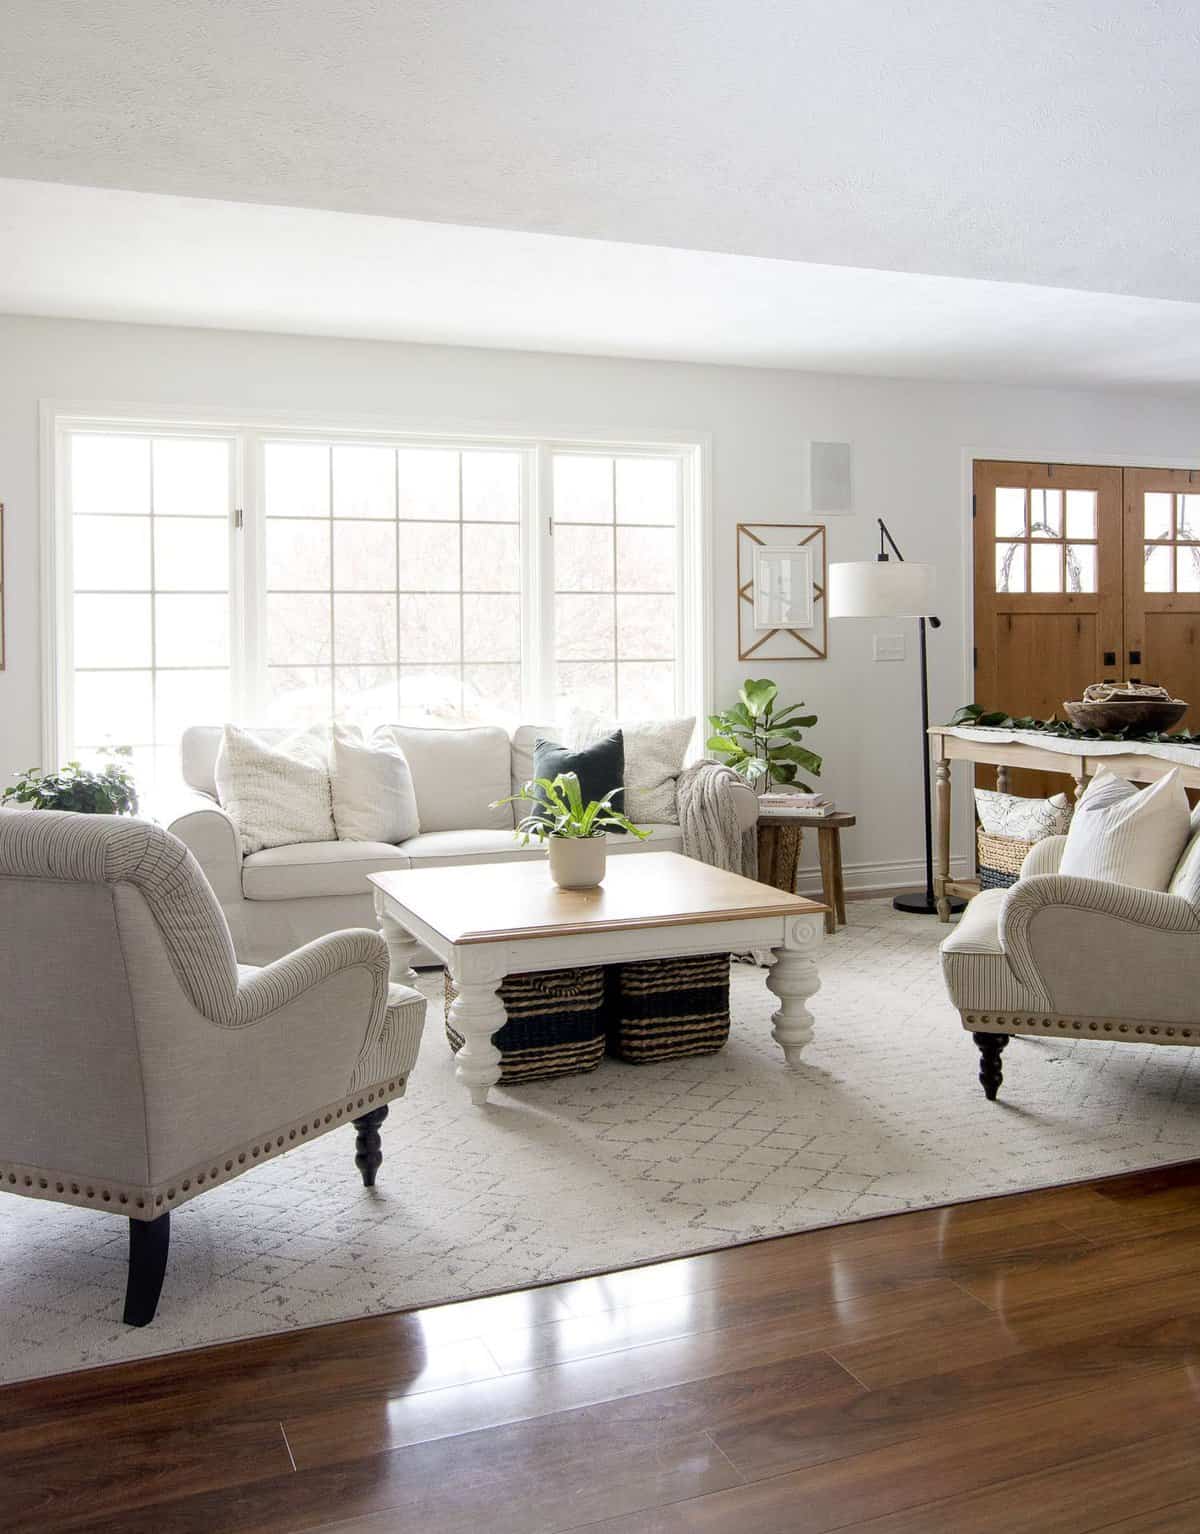 Do you need a change of pace but don't want to break the bank? Change up your layout! Today I'm sharing ways to style farmhouse living room furniture! #fromhousetohaven #livingroomfurniture #livingroomdesign #coffeetable